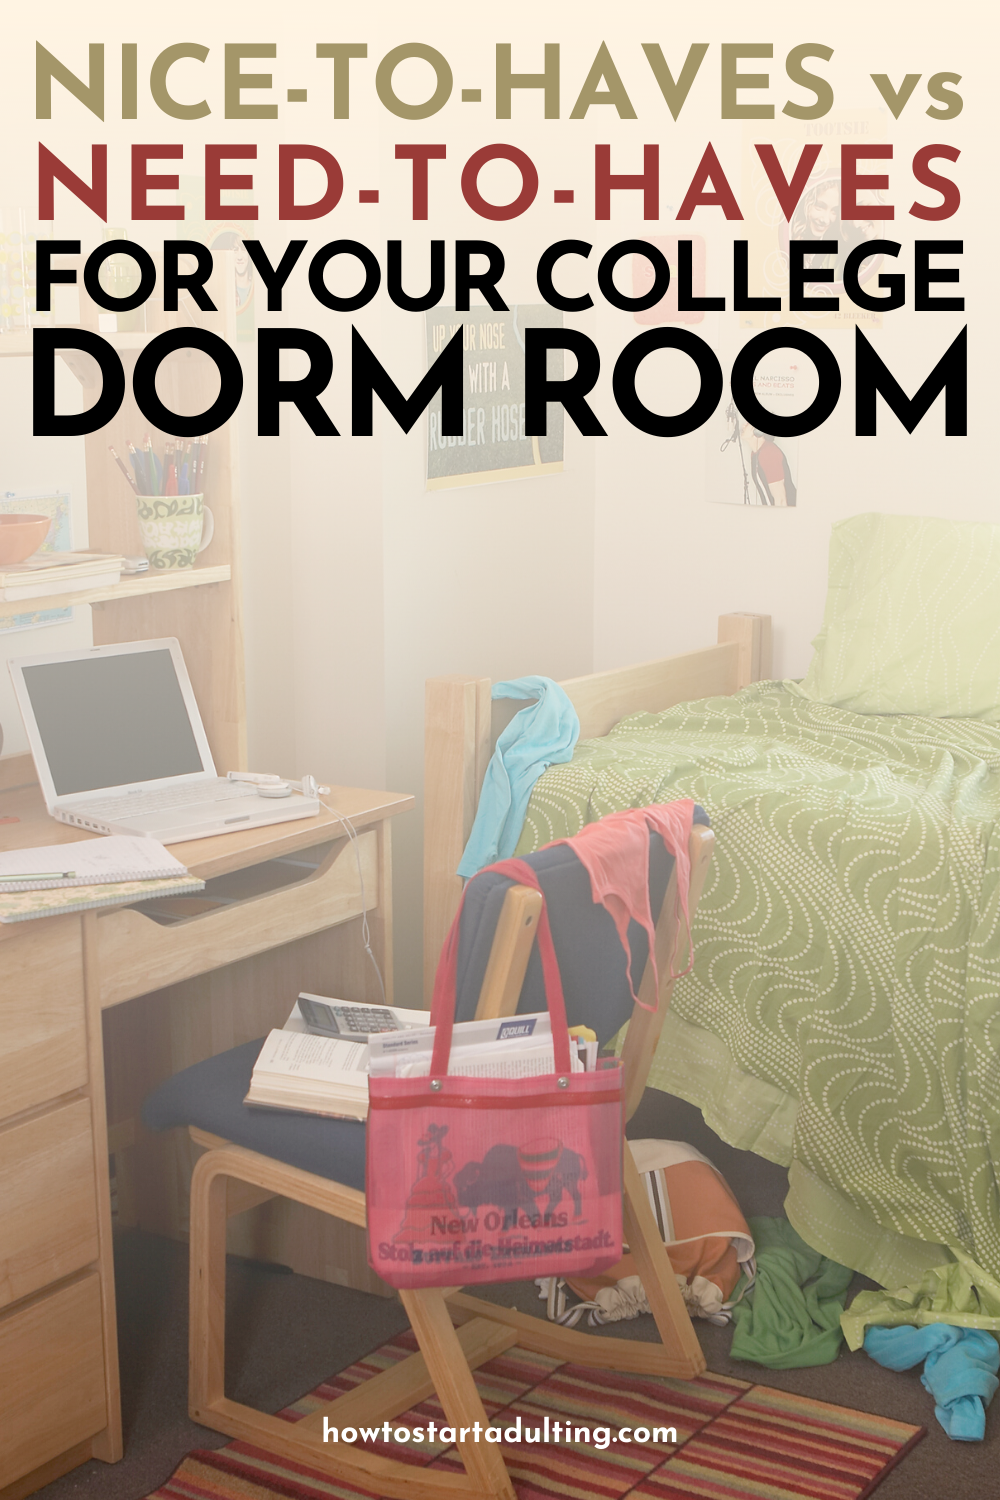 The Nice-To-Haves Vs Need-To-Haves For Your College Dorm Room, What to pack for college or university #college #collegelife #collegedormroom #dormroom #packinglist #whattopack